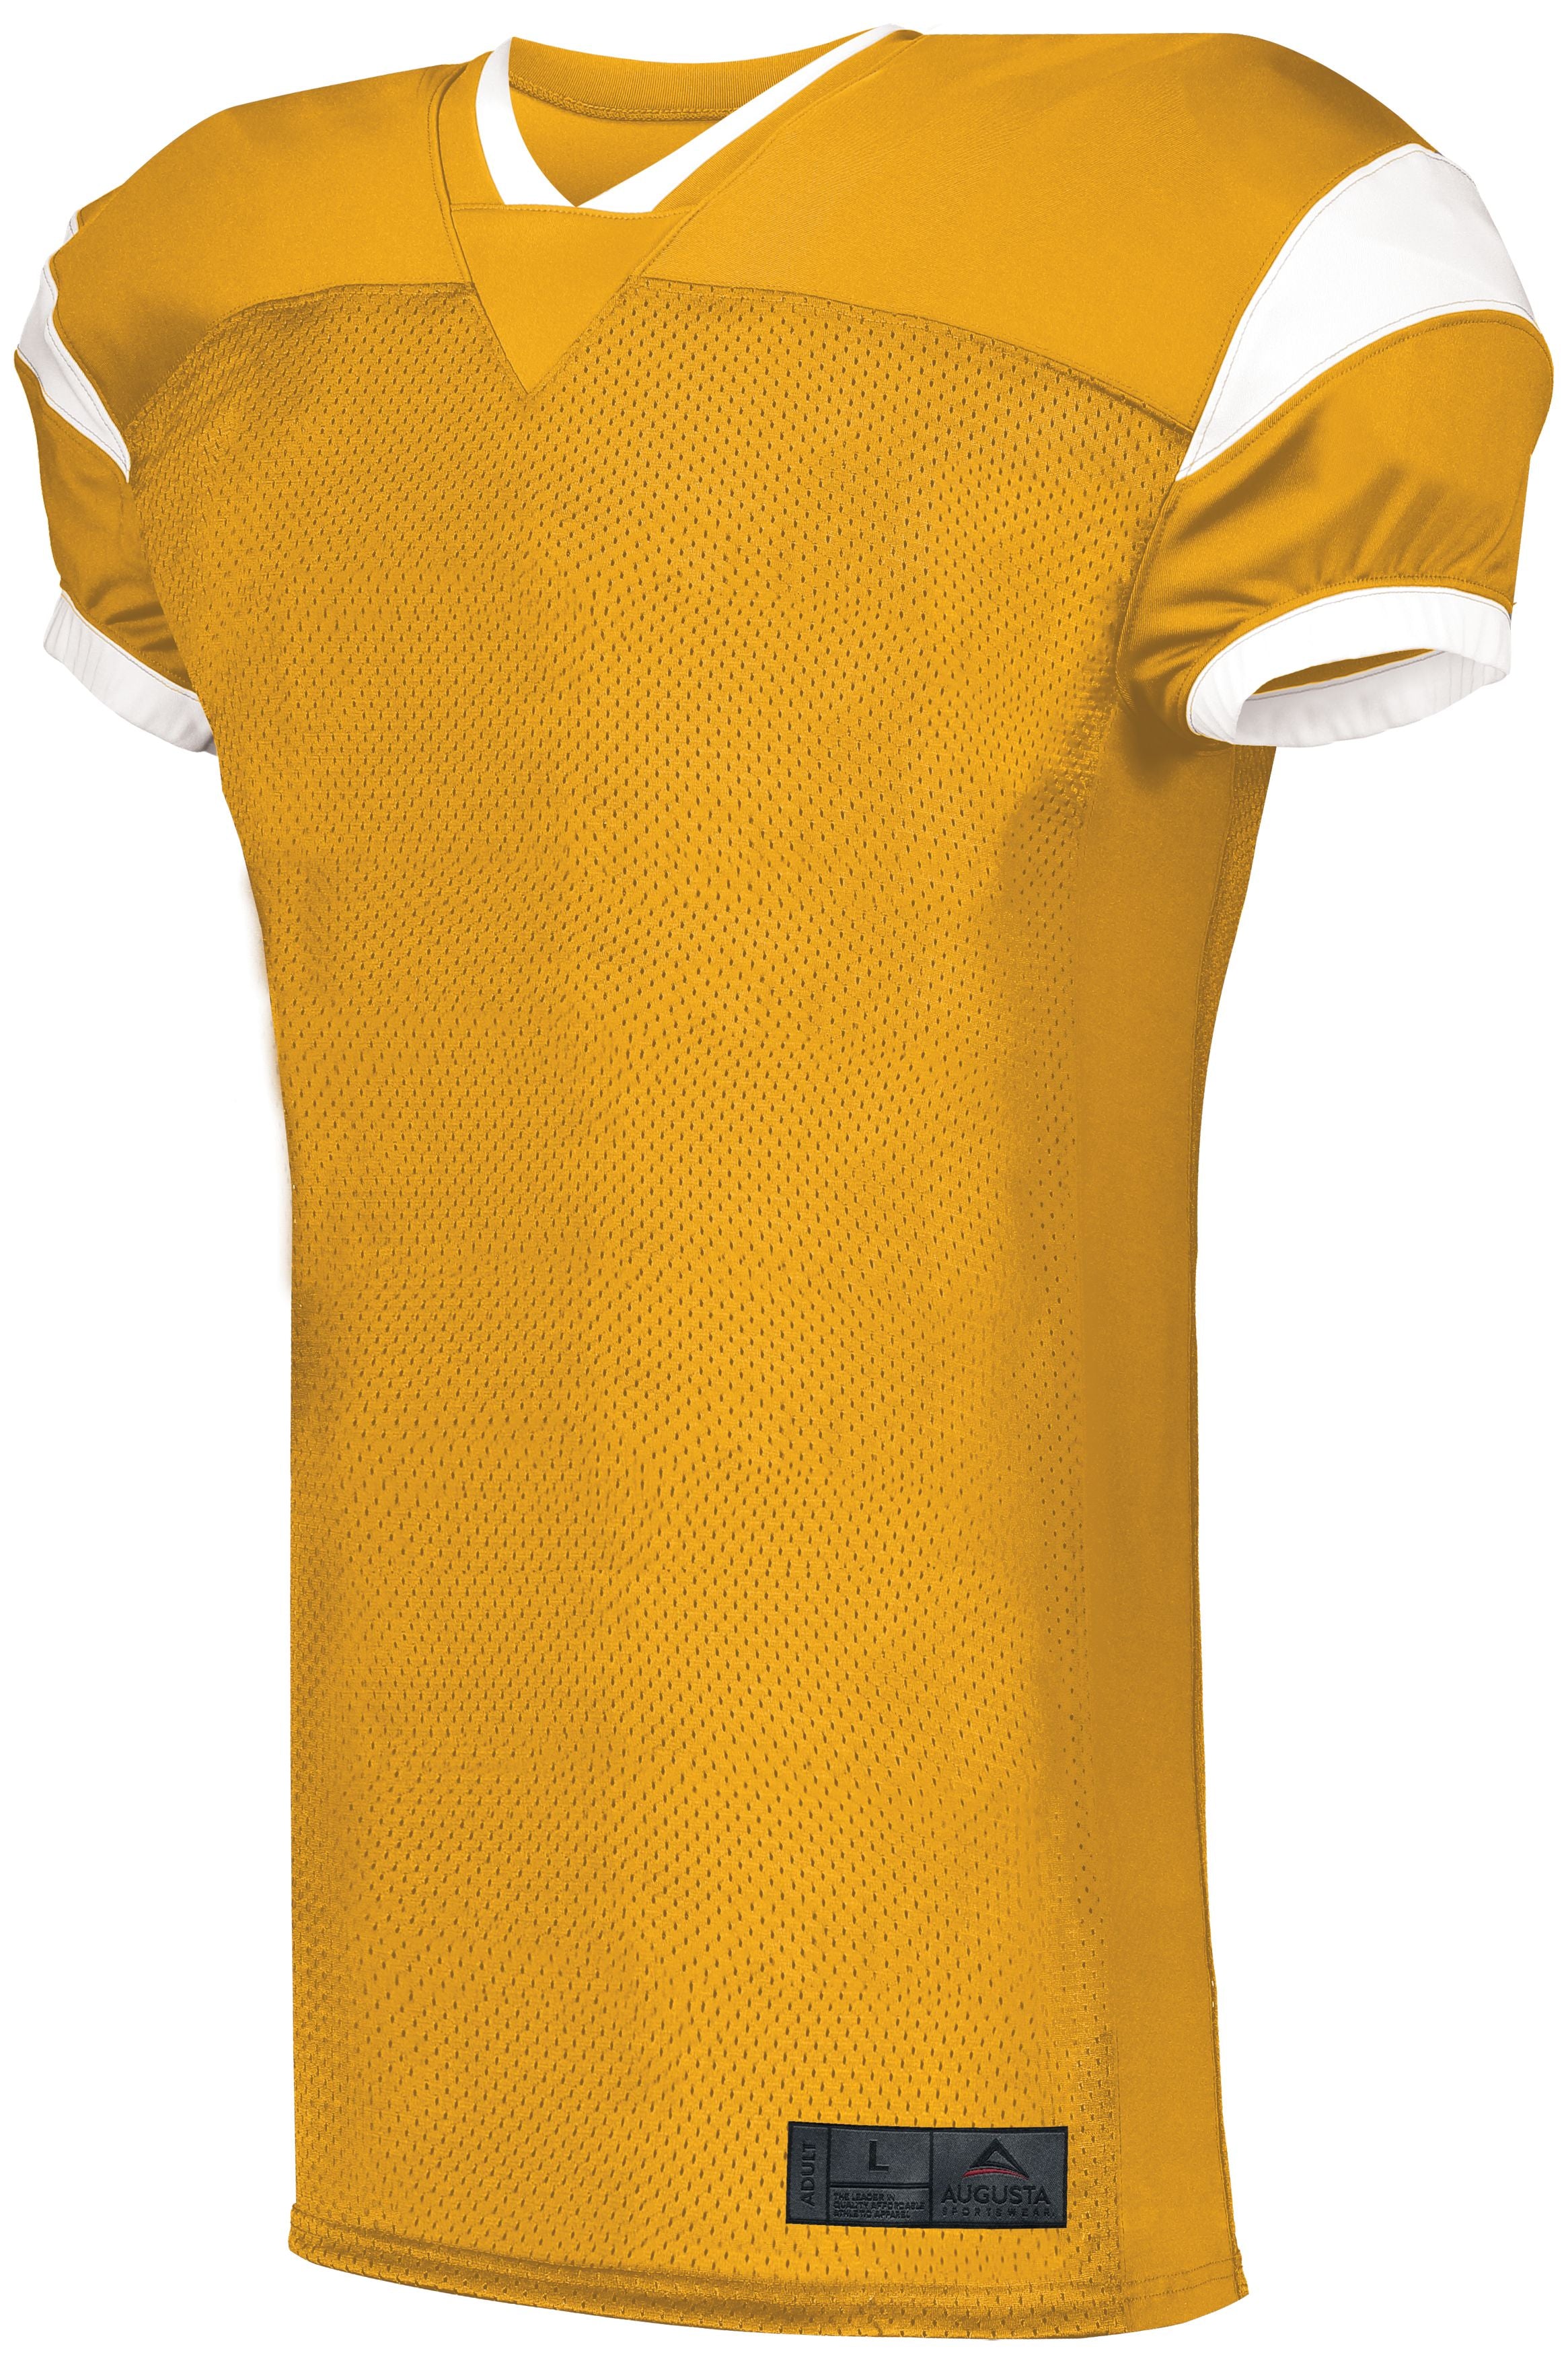 Augusta Sportswear Slant Football Jersey in Gold/White  -Part of the Adult, Adult-Jersey, Augusta-Products, Football, Shirts, All-Sports, All-Sports-1 product lines at KanaleyCreations.com